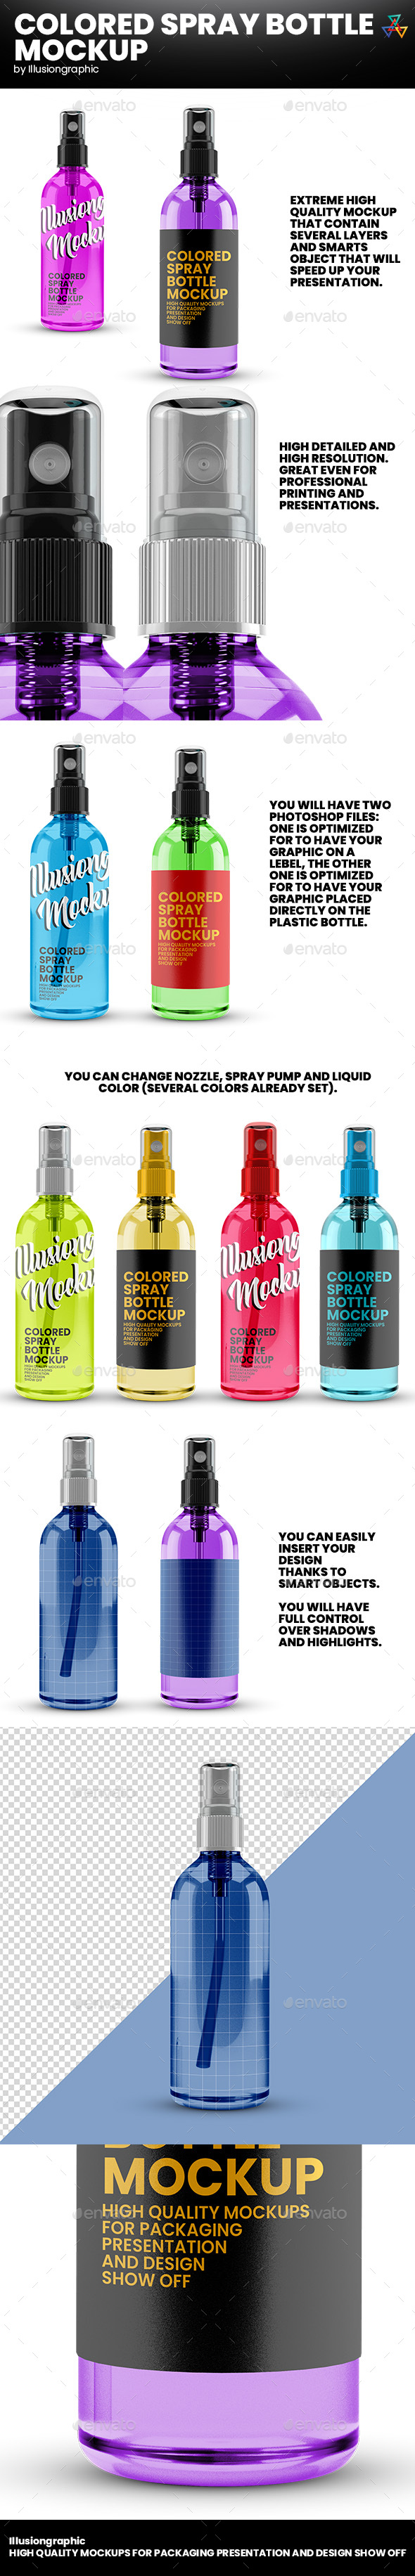 Download Colored Spray Bottle Mockup By Illusiongraphic Graphicriver